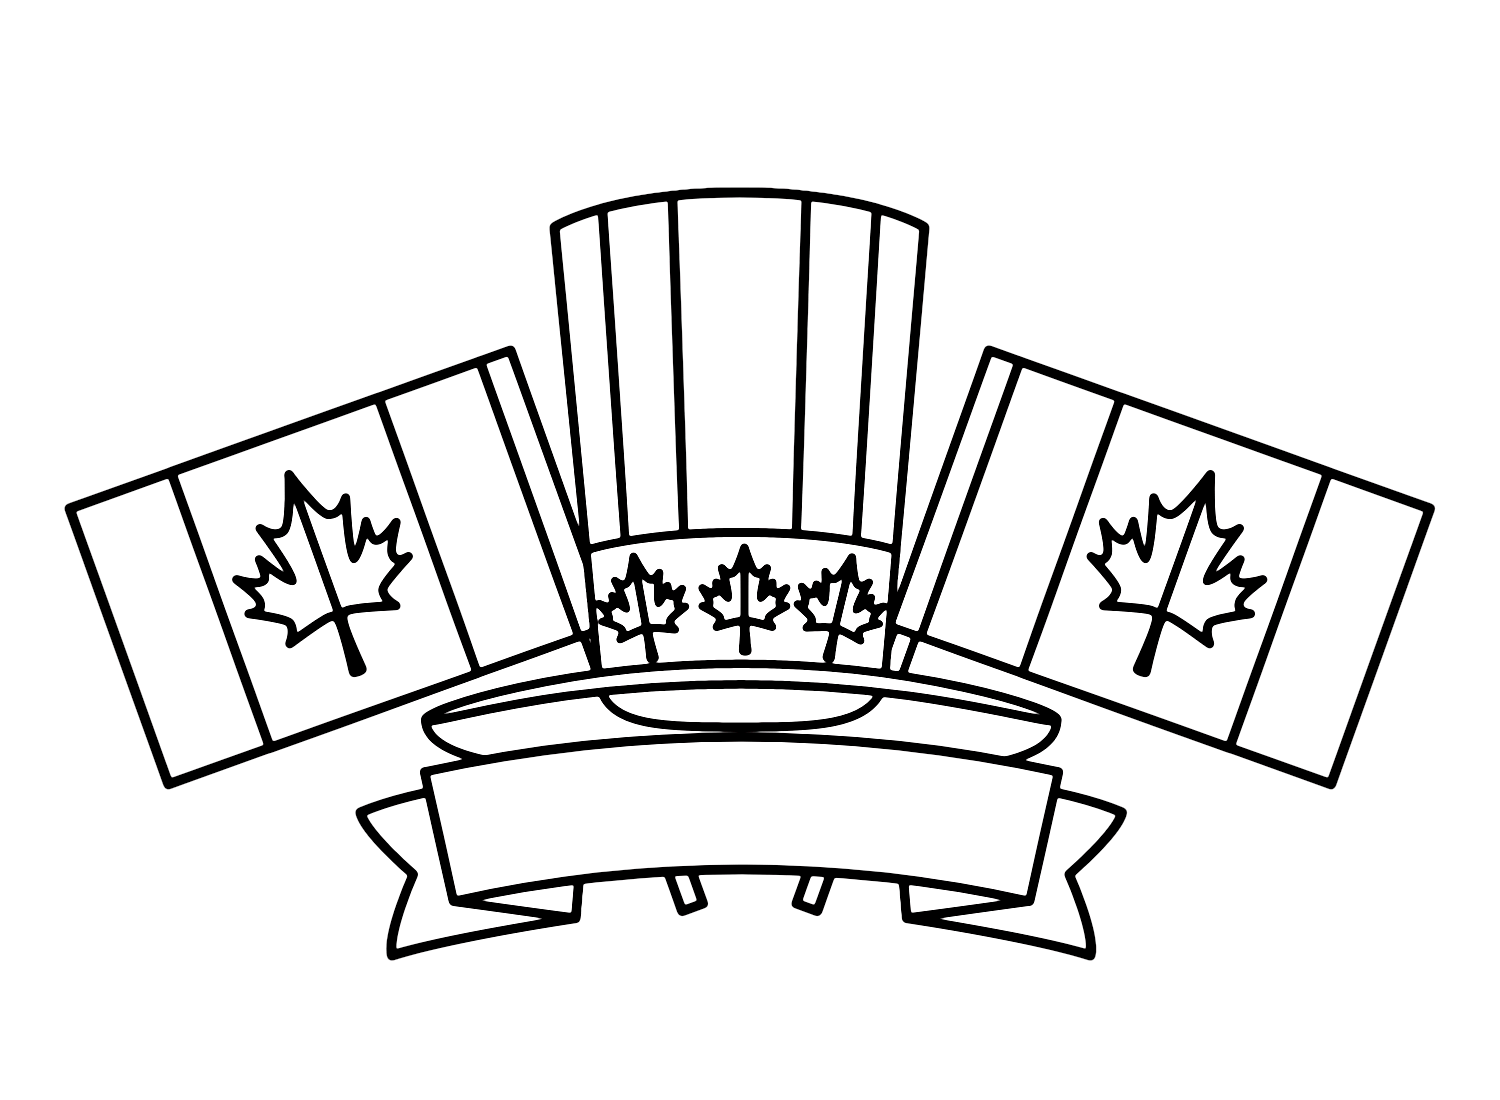 Canadian Top Hat with Flags Frame Coloring Page